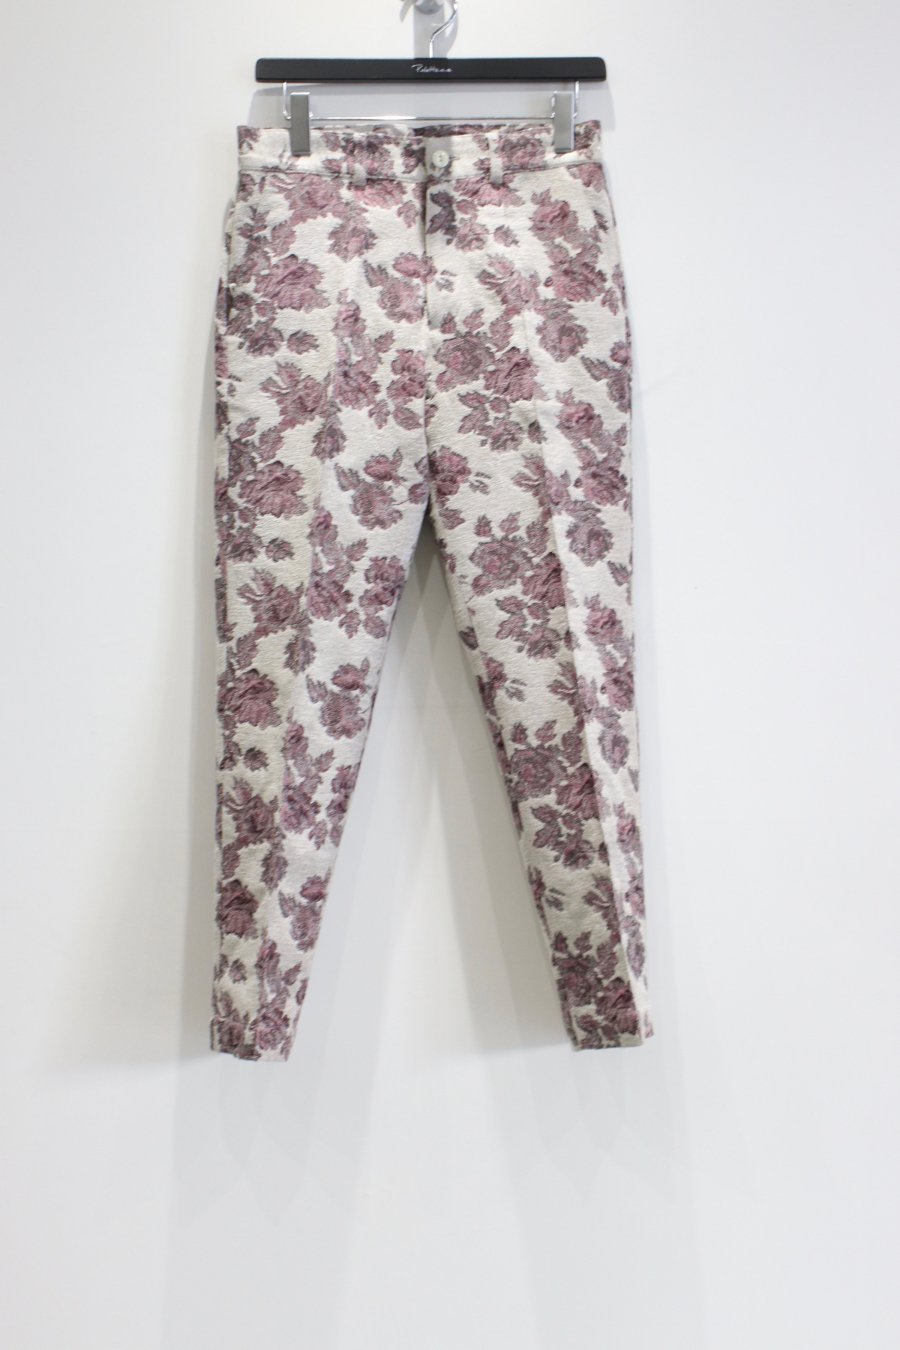 Urig  GOBELIN PIN TUCK PANTS(WISTERIA)<img class='new_mark_img2' src='https://img.shop-pro.jp/img/new/icons15.gif' style='border:none;display:inline;margin:0px;padding:0px;width:auto;' />